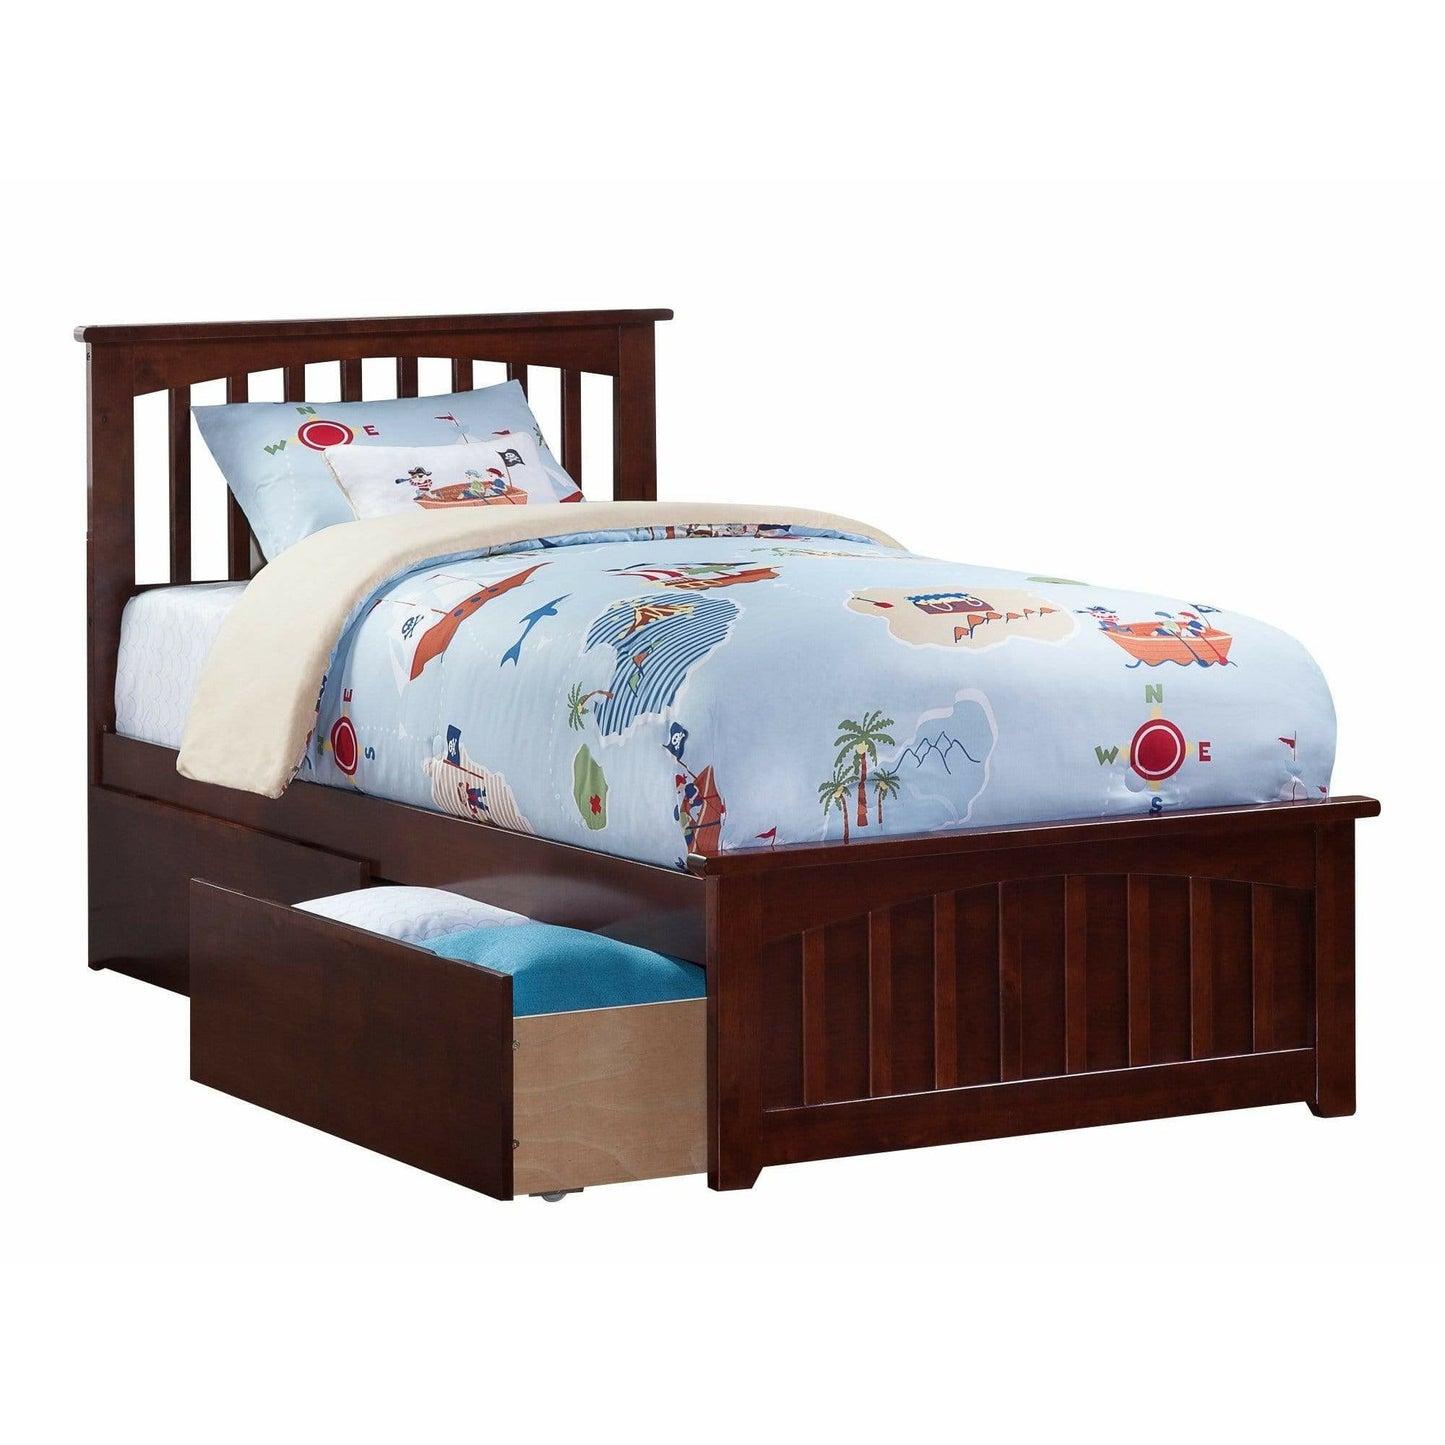 Atlantic Furniture Bed walnut Mission Twin Platform Bed with Matching Foot Board with 2 Urban Bed Drawers in Espresso